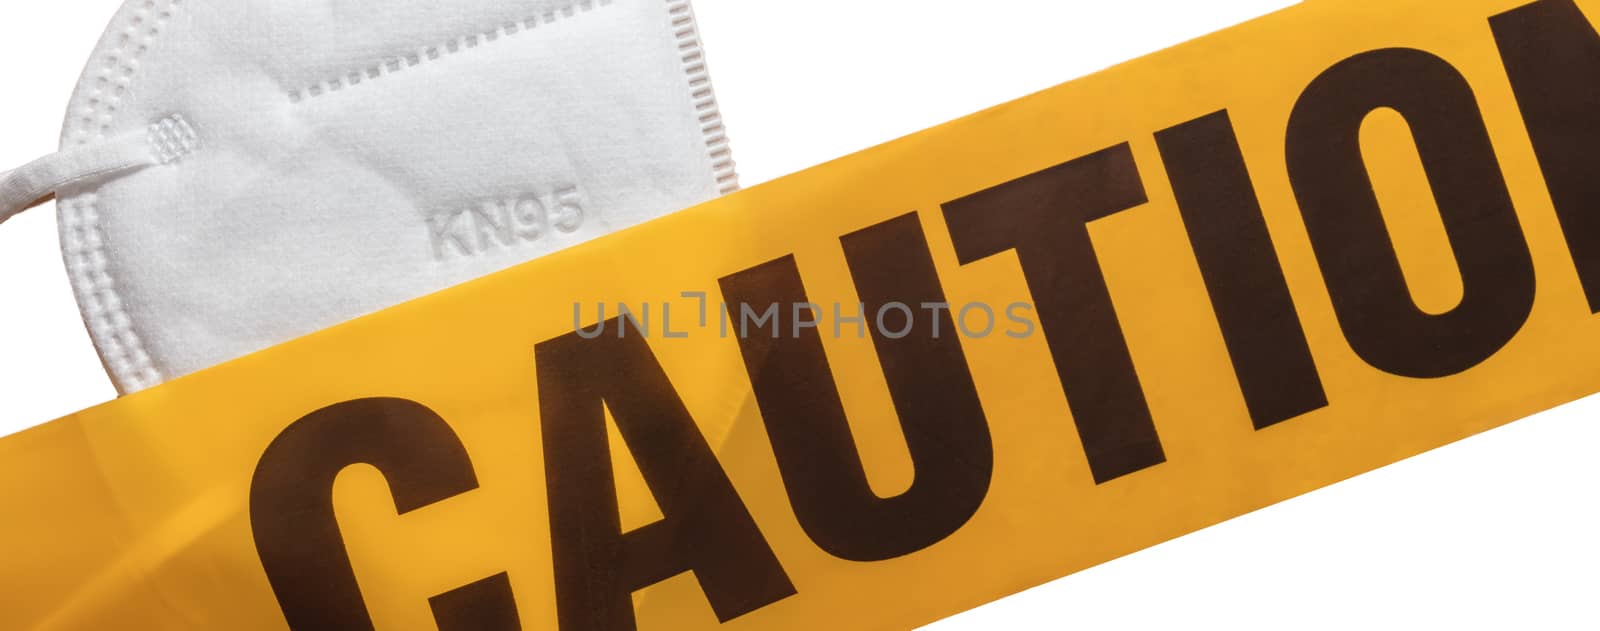 Facial protective mask KN95 covered by yellow caution tape. Isolated. White background. Protection against viruses, bacteria, germs. PPE. Quarantine.